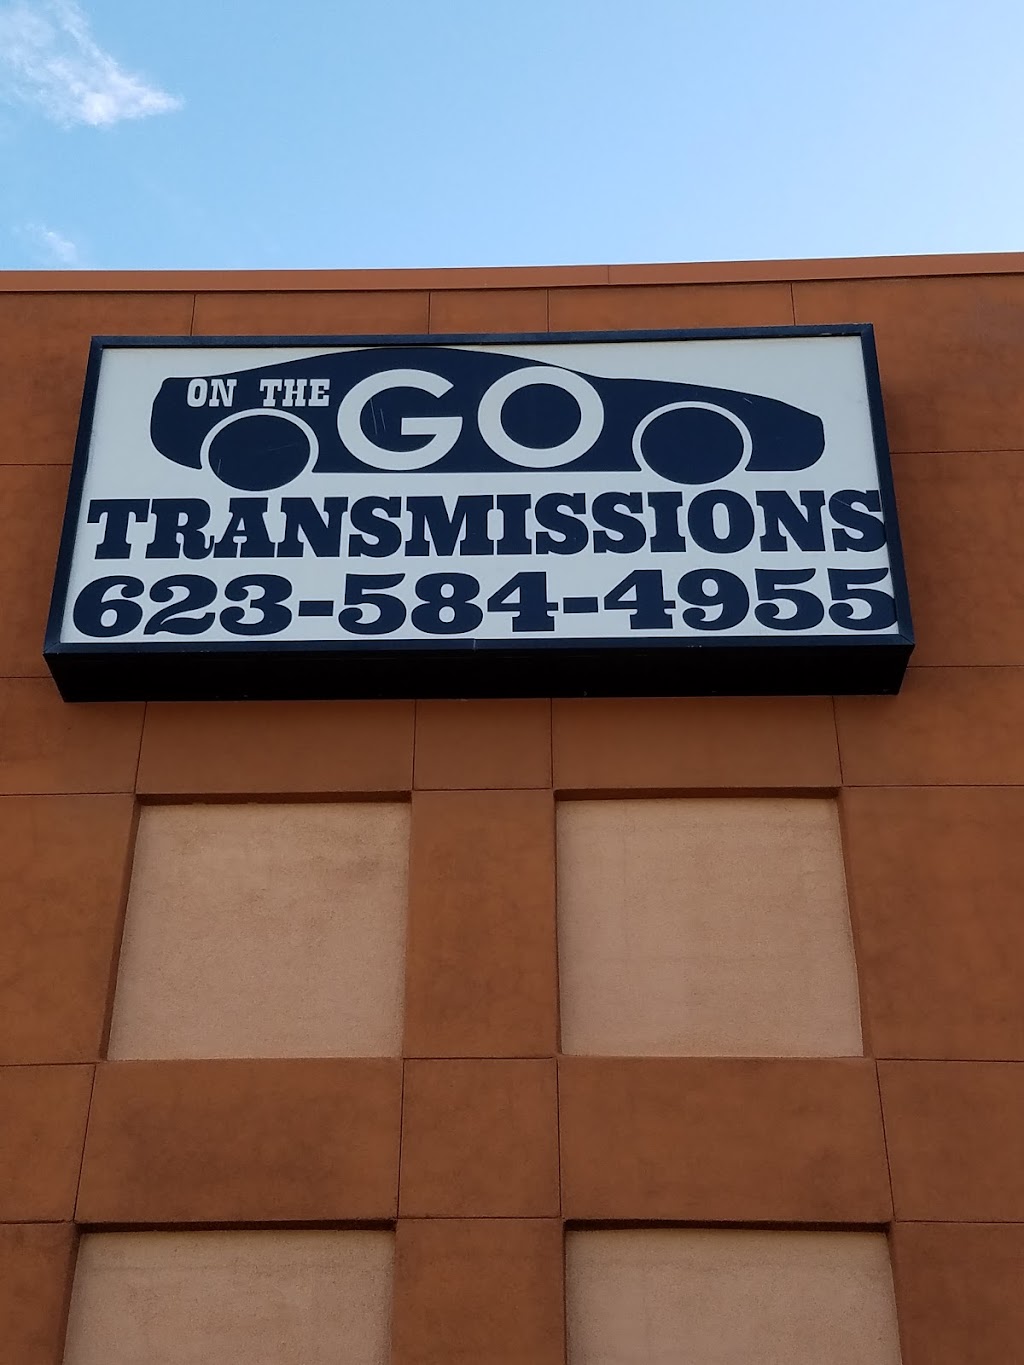 On The Go Transmissions | 14075 W Grand Ave, Surprise, AZ 85374 | Phone: (623) 584-4955